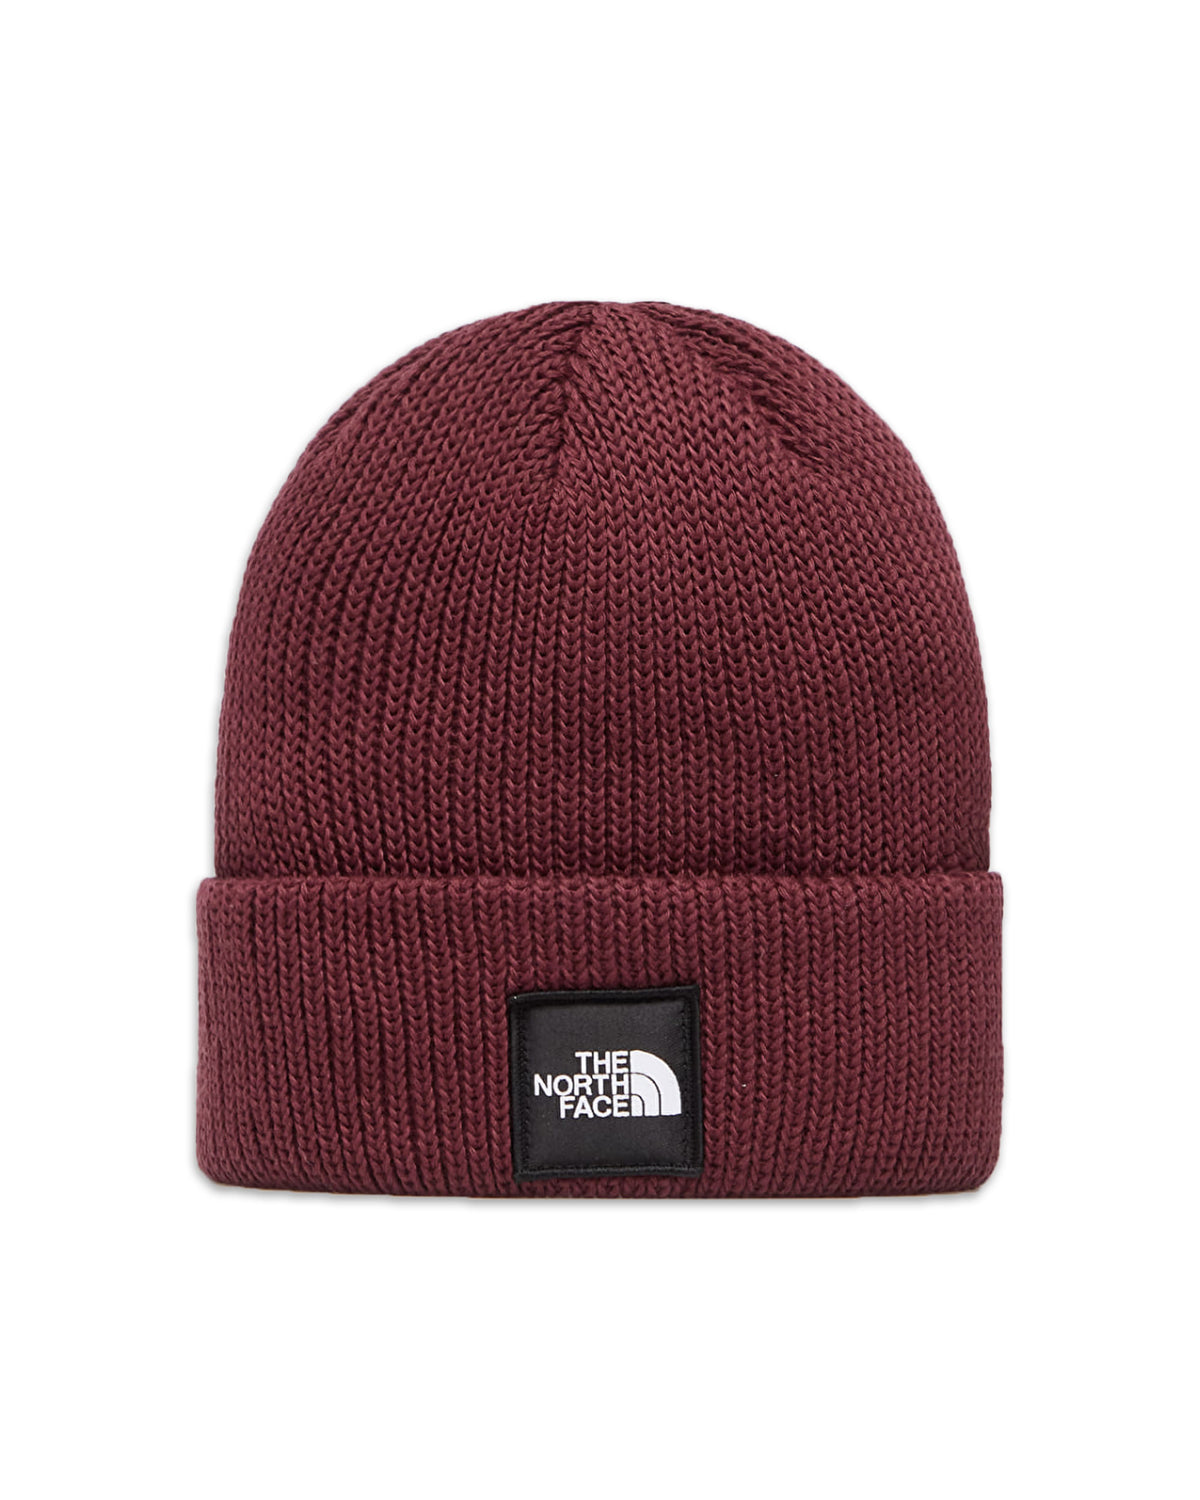 Cappello Beanie The North Face Bordeaux NF0A55KCD4S1